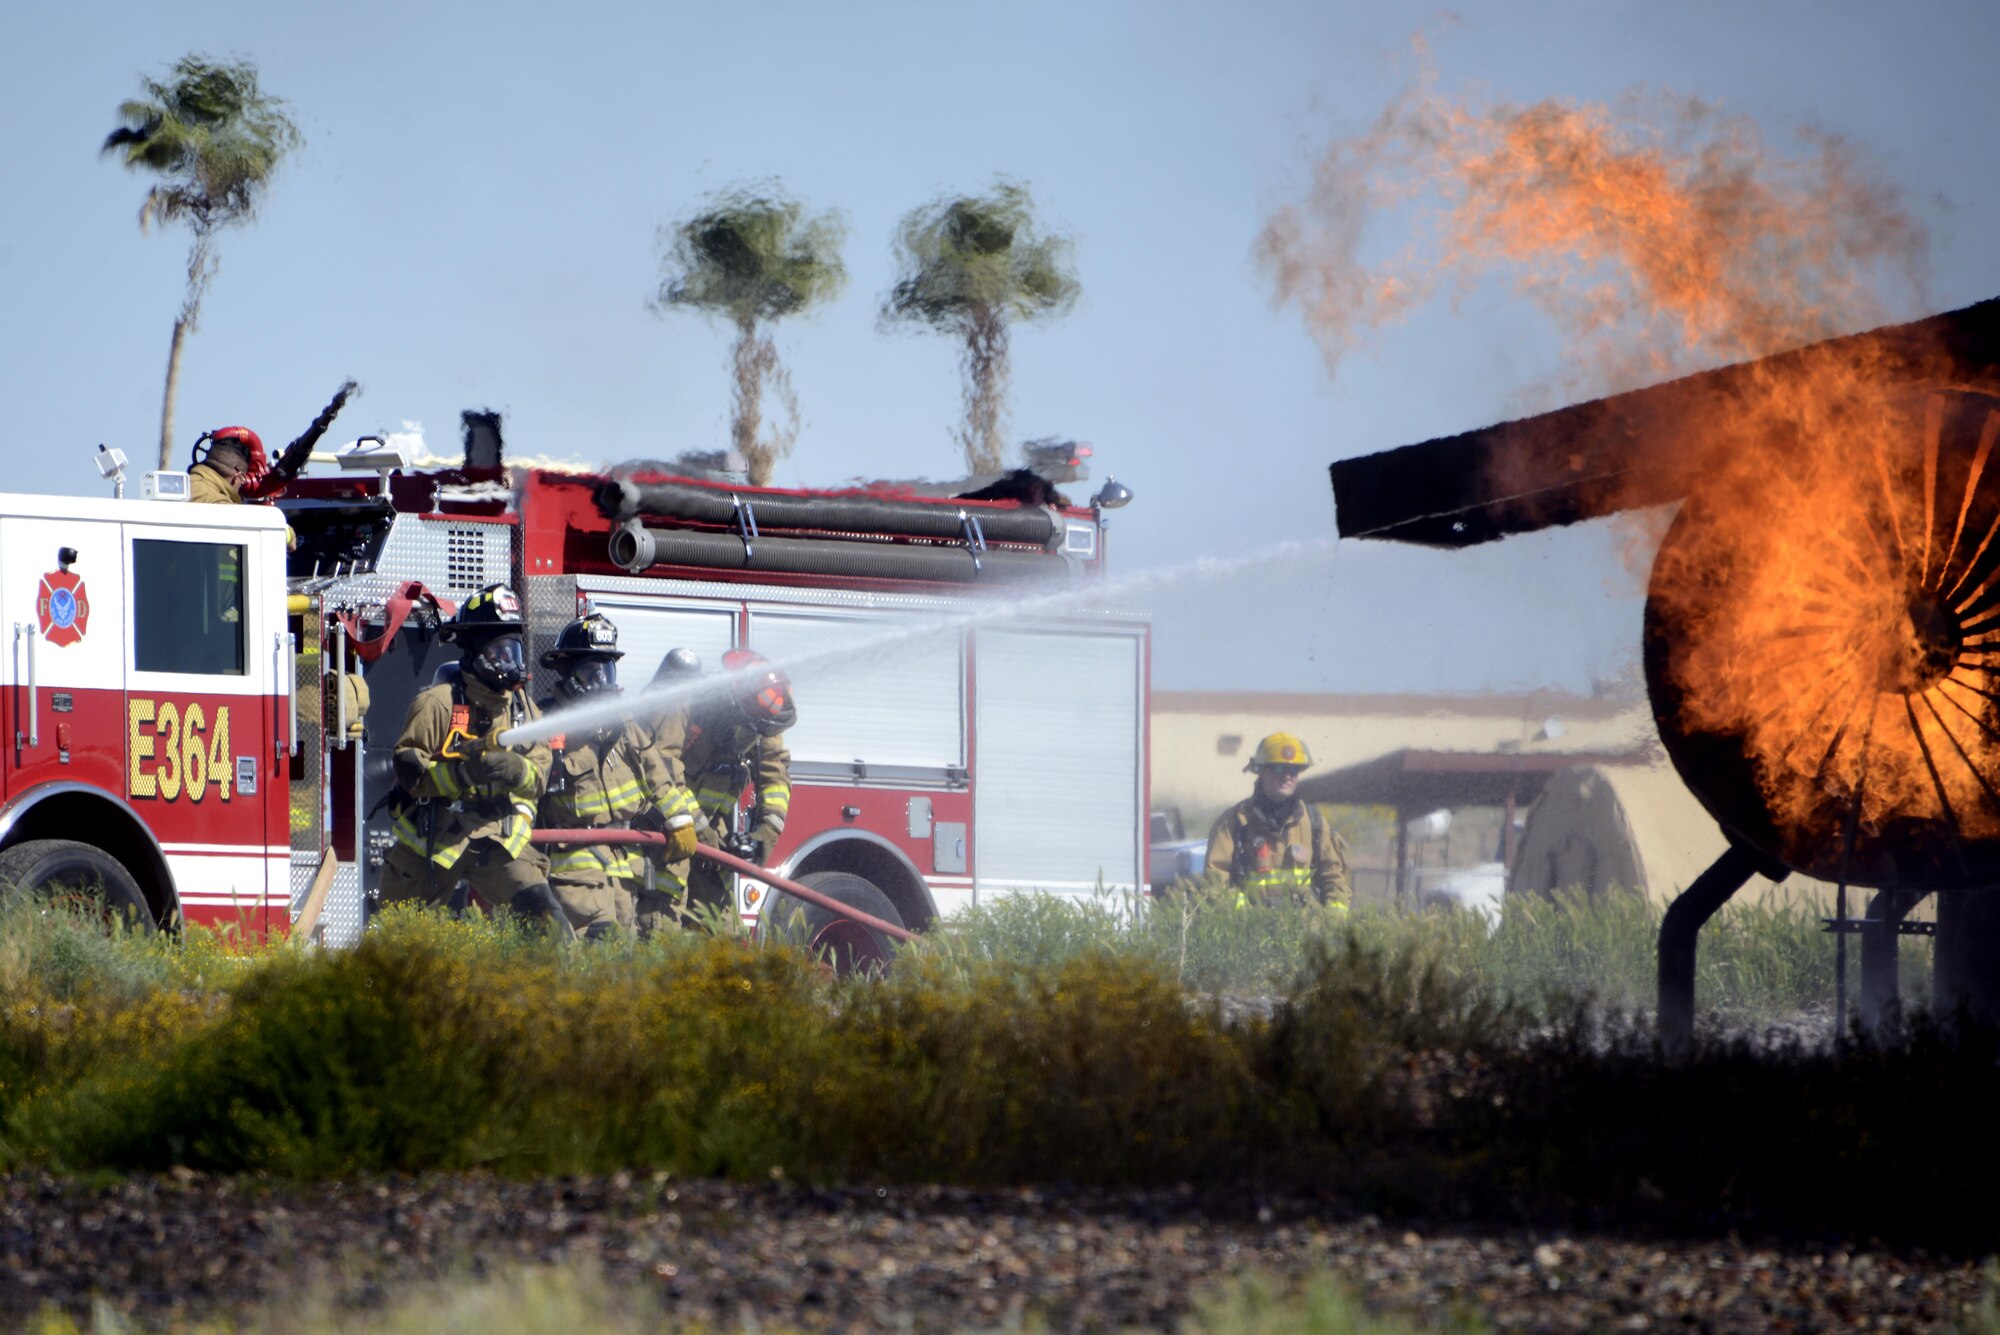 56th Civil Engineer Squadron firefighters and the Scottsdale Fire Department work together to put out a fire during a training exercise Mar. 16, 2017 at Luke Air Force Base, Ariz. The firefighters were training to respond to an aircraft fire. (U.S. Air Force photo by Senior Airman Devante Williams)  